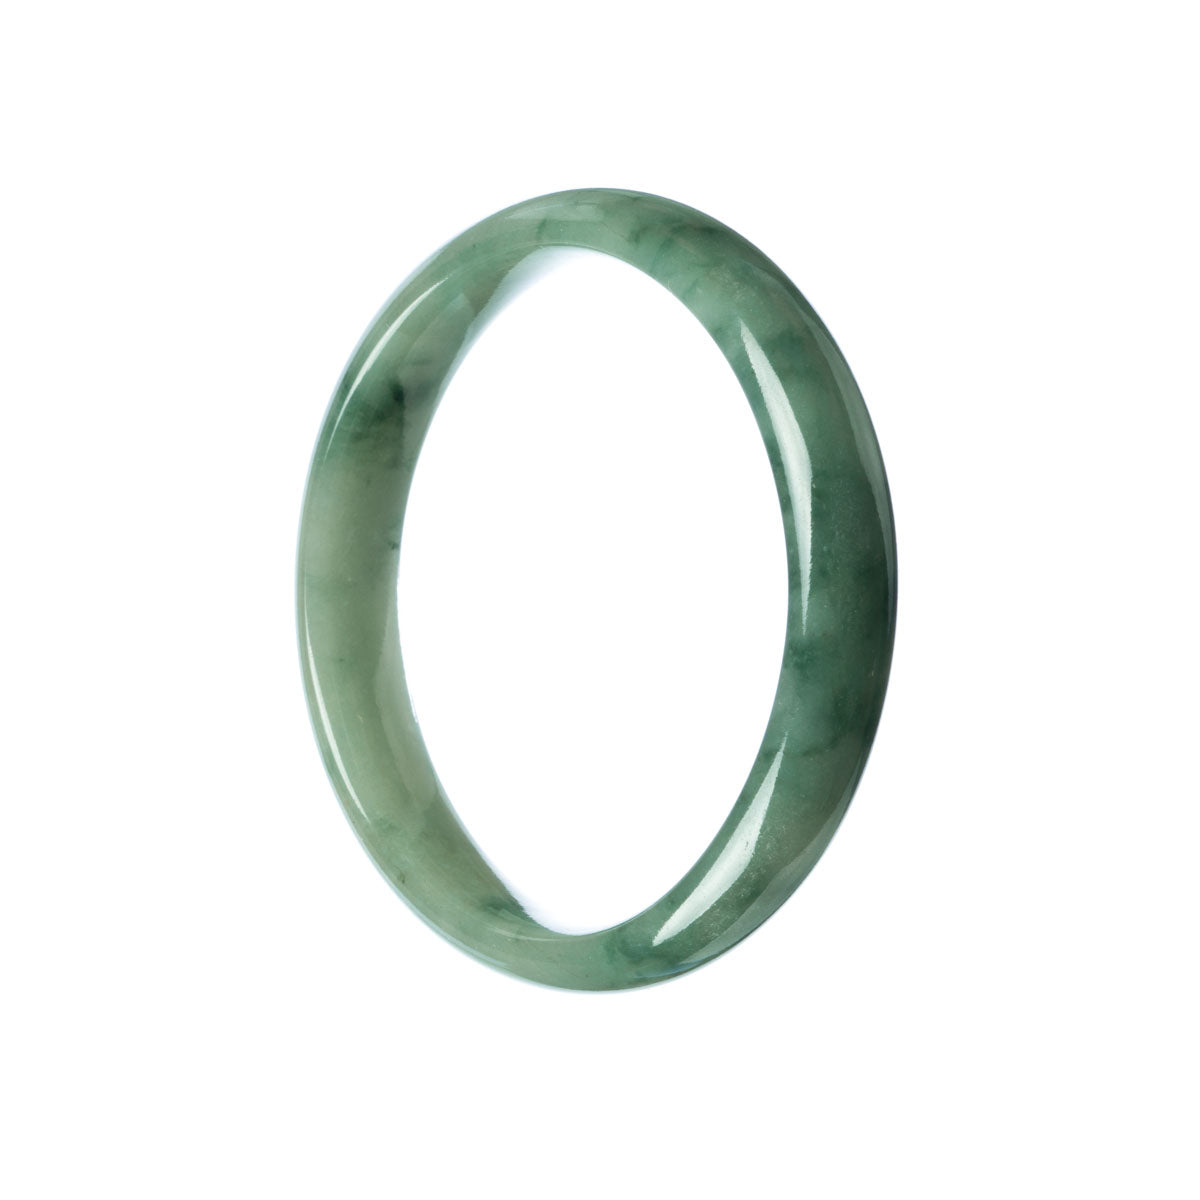 A close-up image of an elegant green jadeite bangle bracelet with a half-moon shape, measuring 59mm in diameter. The bracelet is made of authentic Grade A jadeite, known for its beautiful color and high quality. The brand name "MAYS" is also mentioned, possibly indicating the designer or manufacturer of the bracelet.